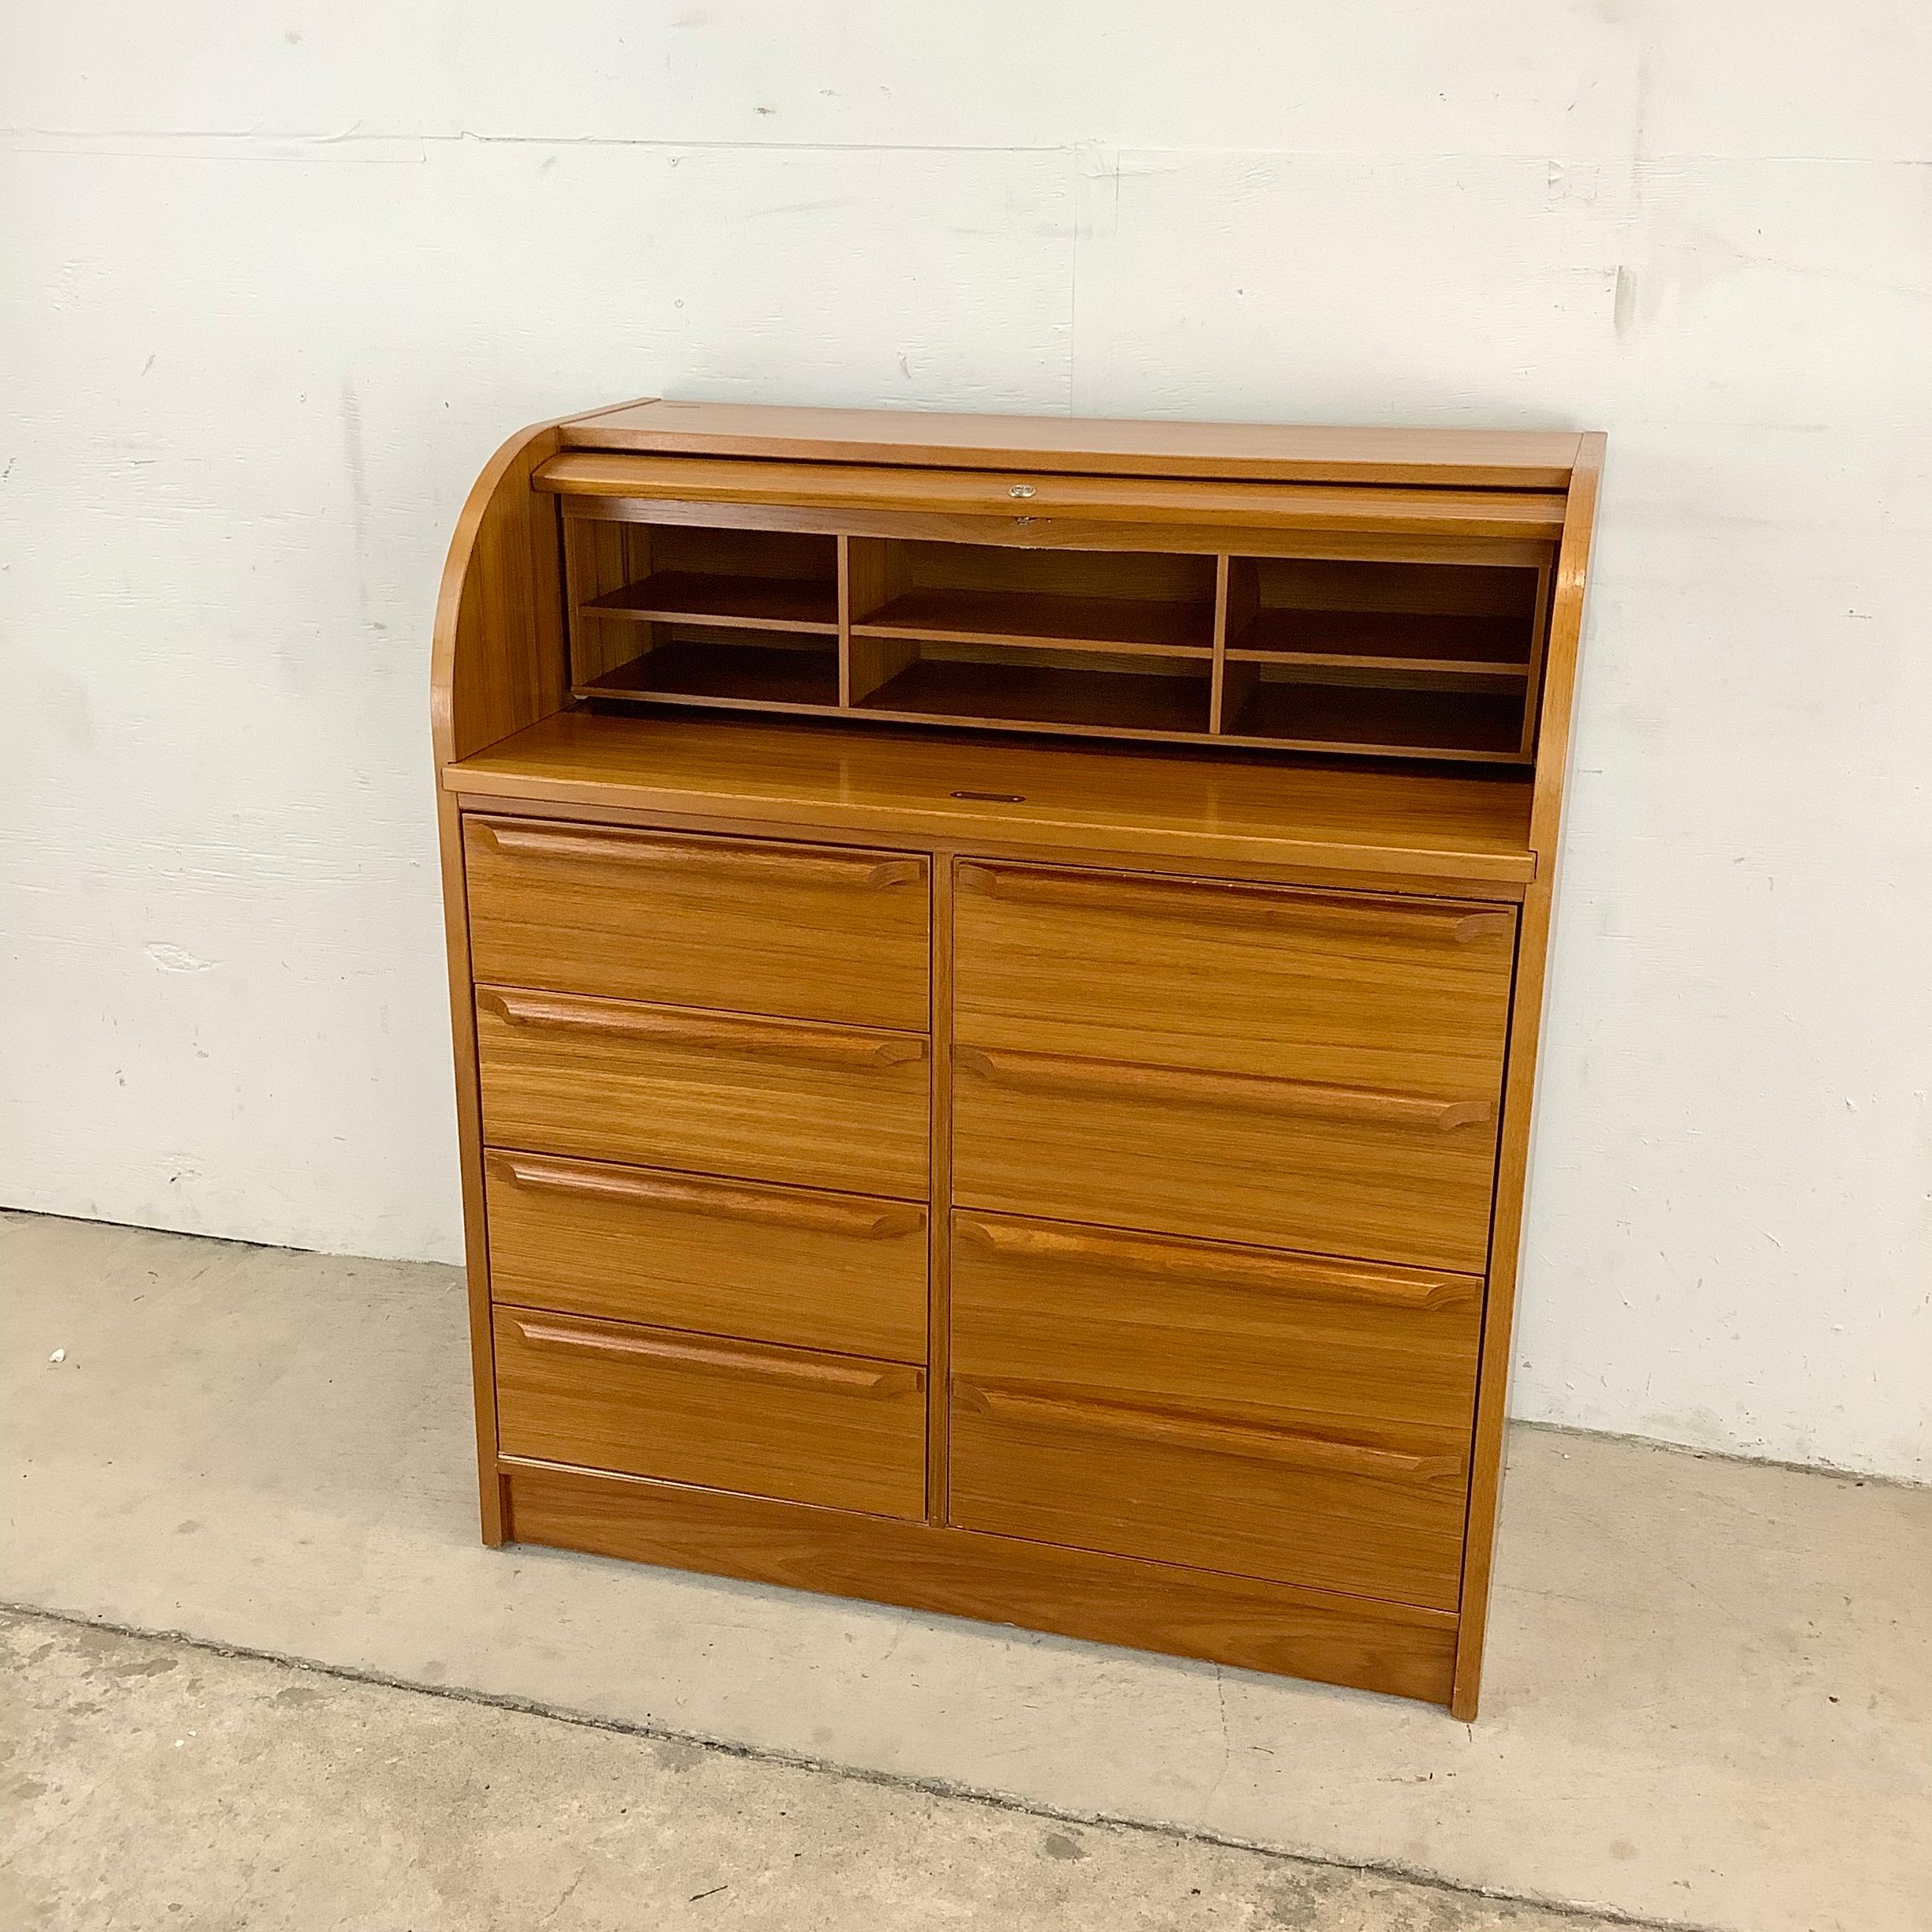 Introducing this Vintage Modern Teak Rolltop Desk, a sleek and sophisticated piece of furniture that seamlessly blends timeless Danish design with practical functionality. Crafted from rich teak wood, known for its durability and natural beauty,